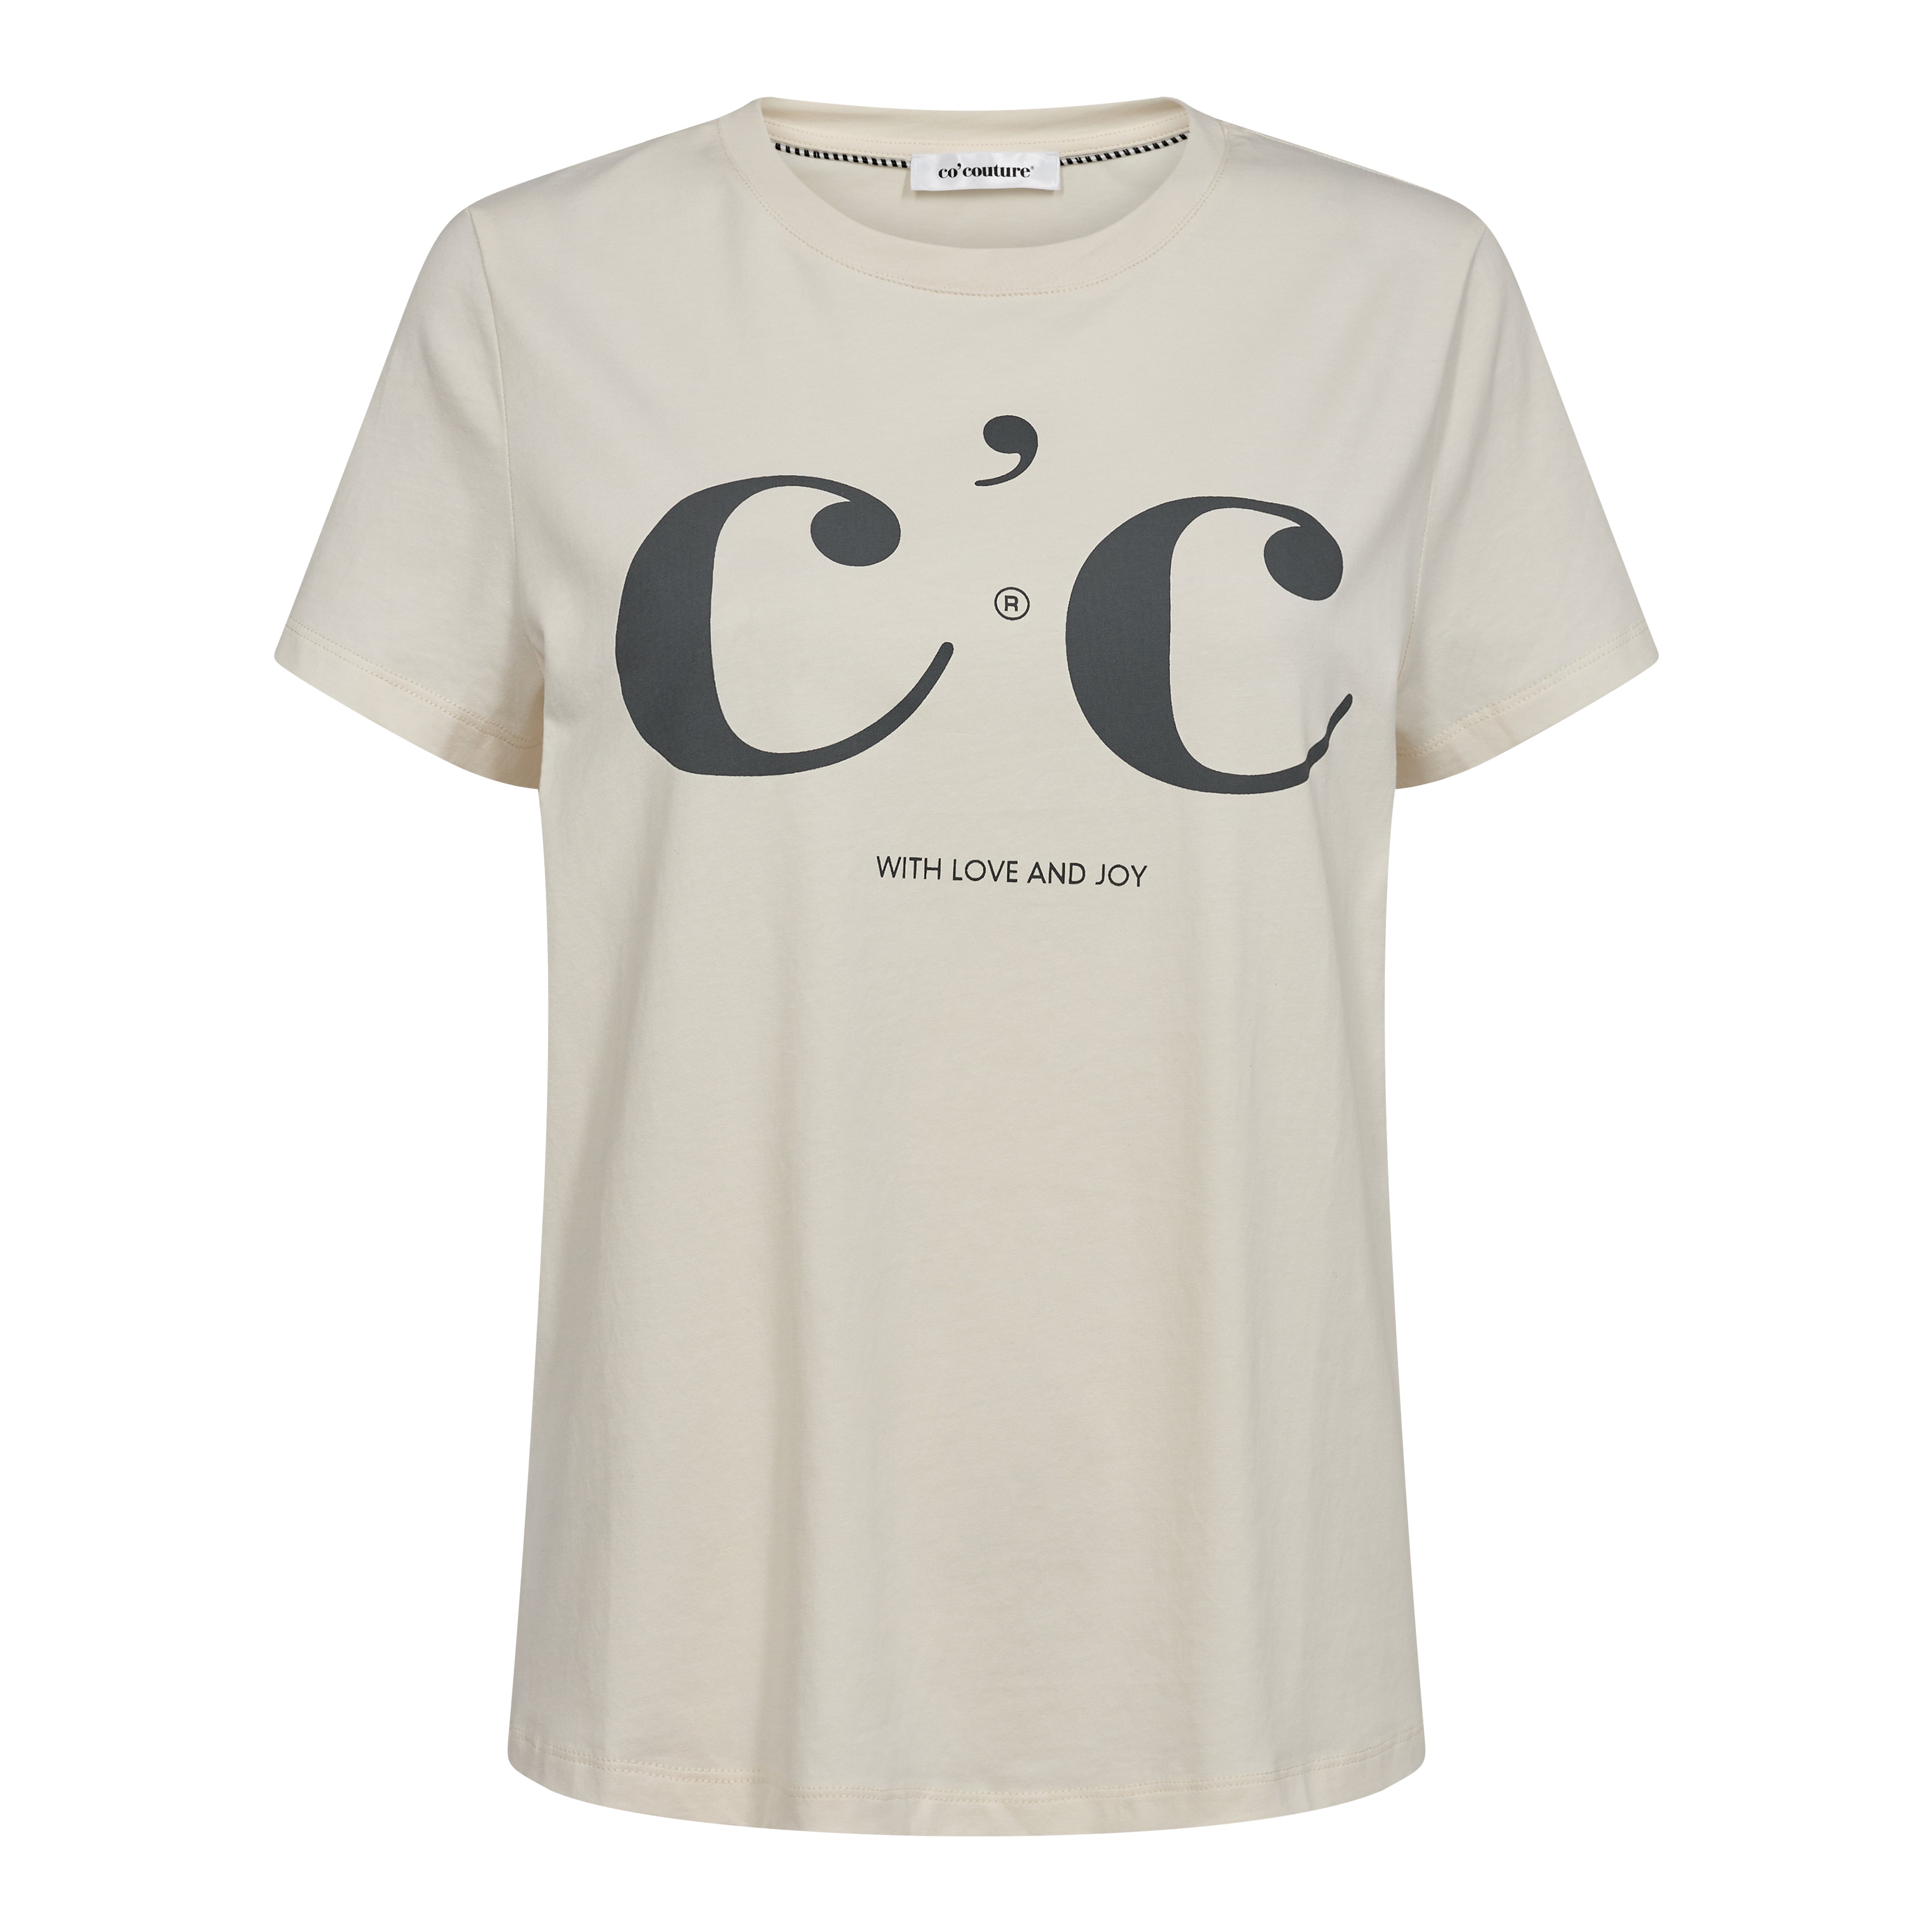 Co'couture CC CleanCC Tee